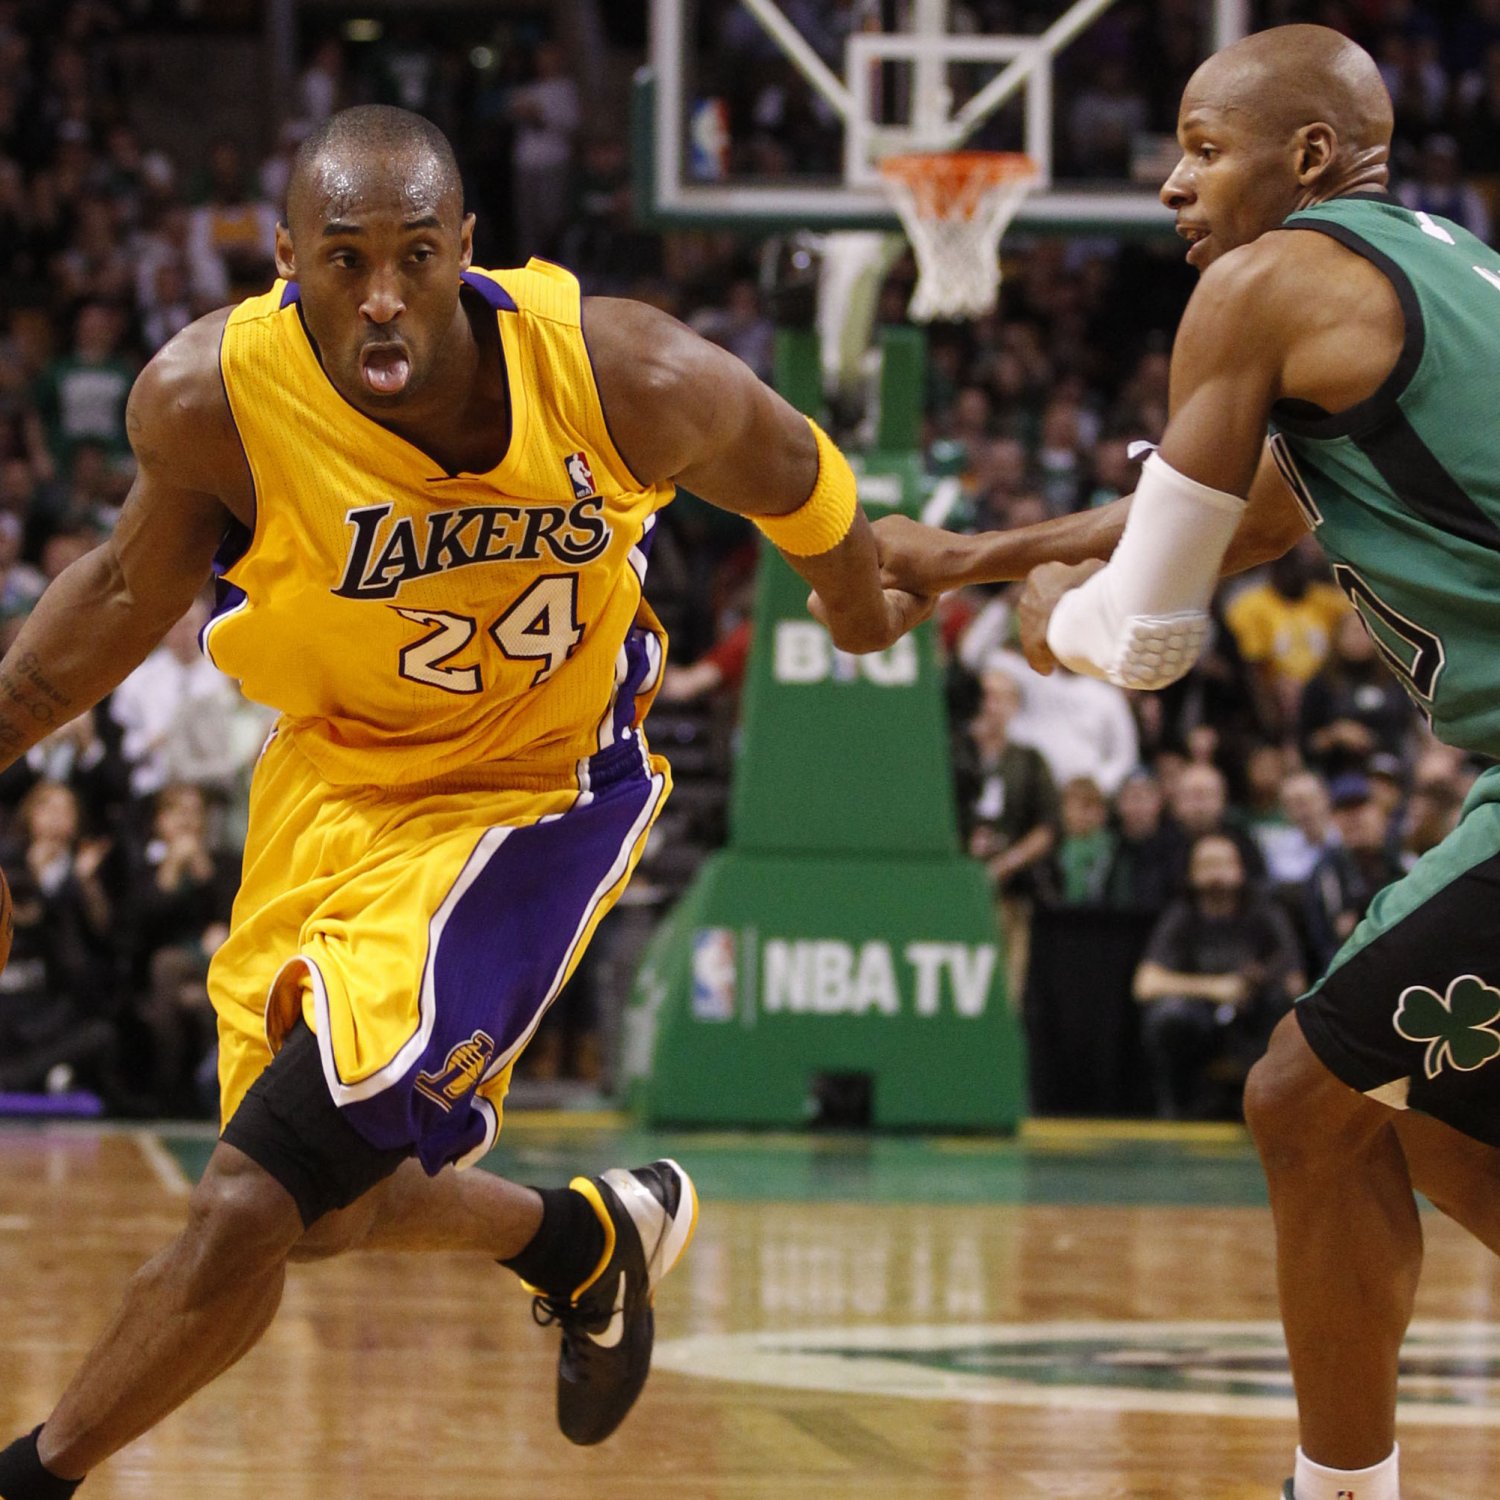 Lakers-Celtics and Most Storied Rivalries in the NBA | Bleacher Report